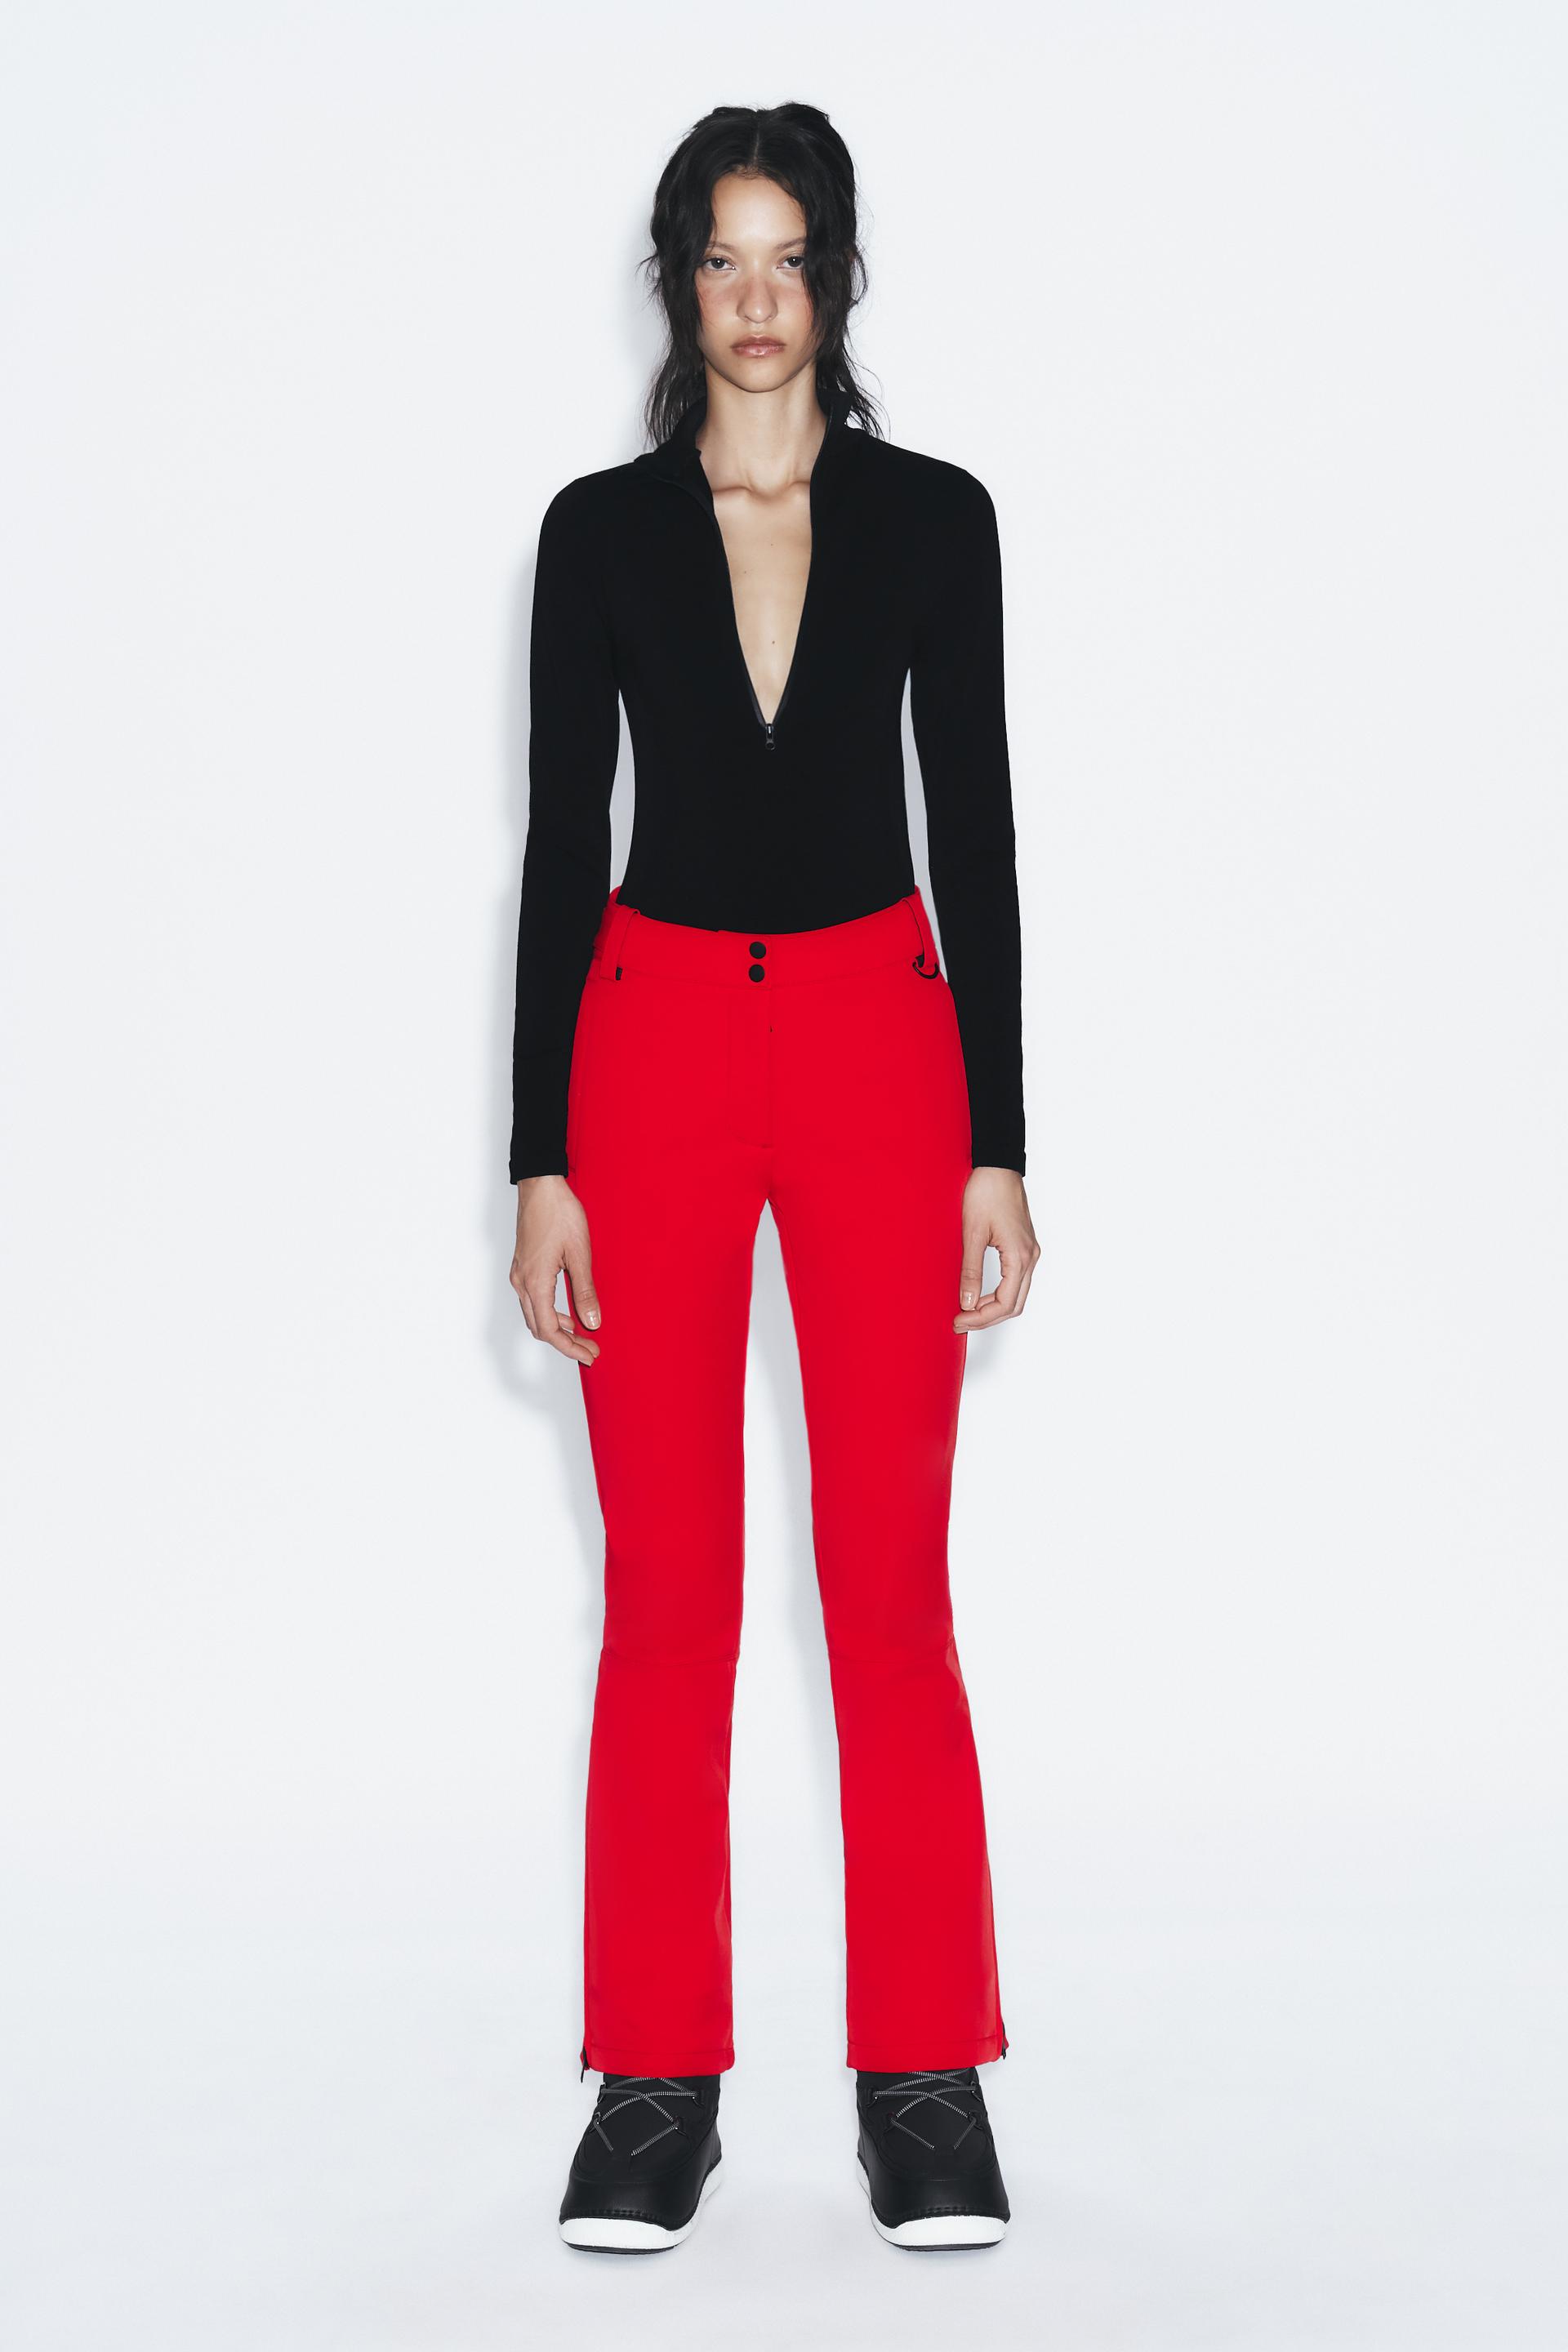 ZARA NEW Small FLARE TROUSERS WITH HIGH WAIST PANT RED ASYMMETRICAL PANT